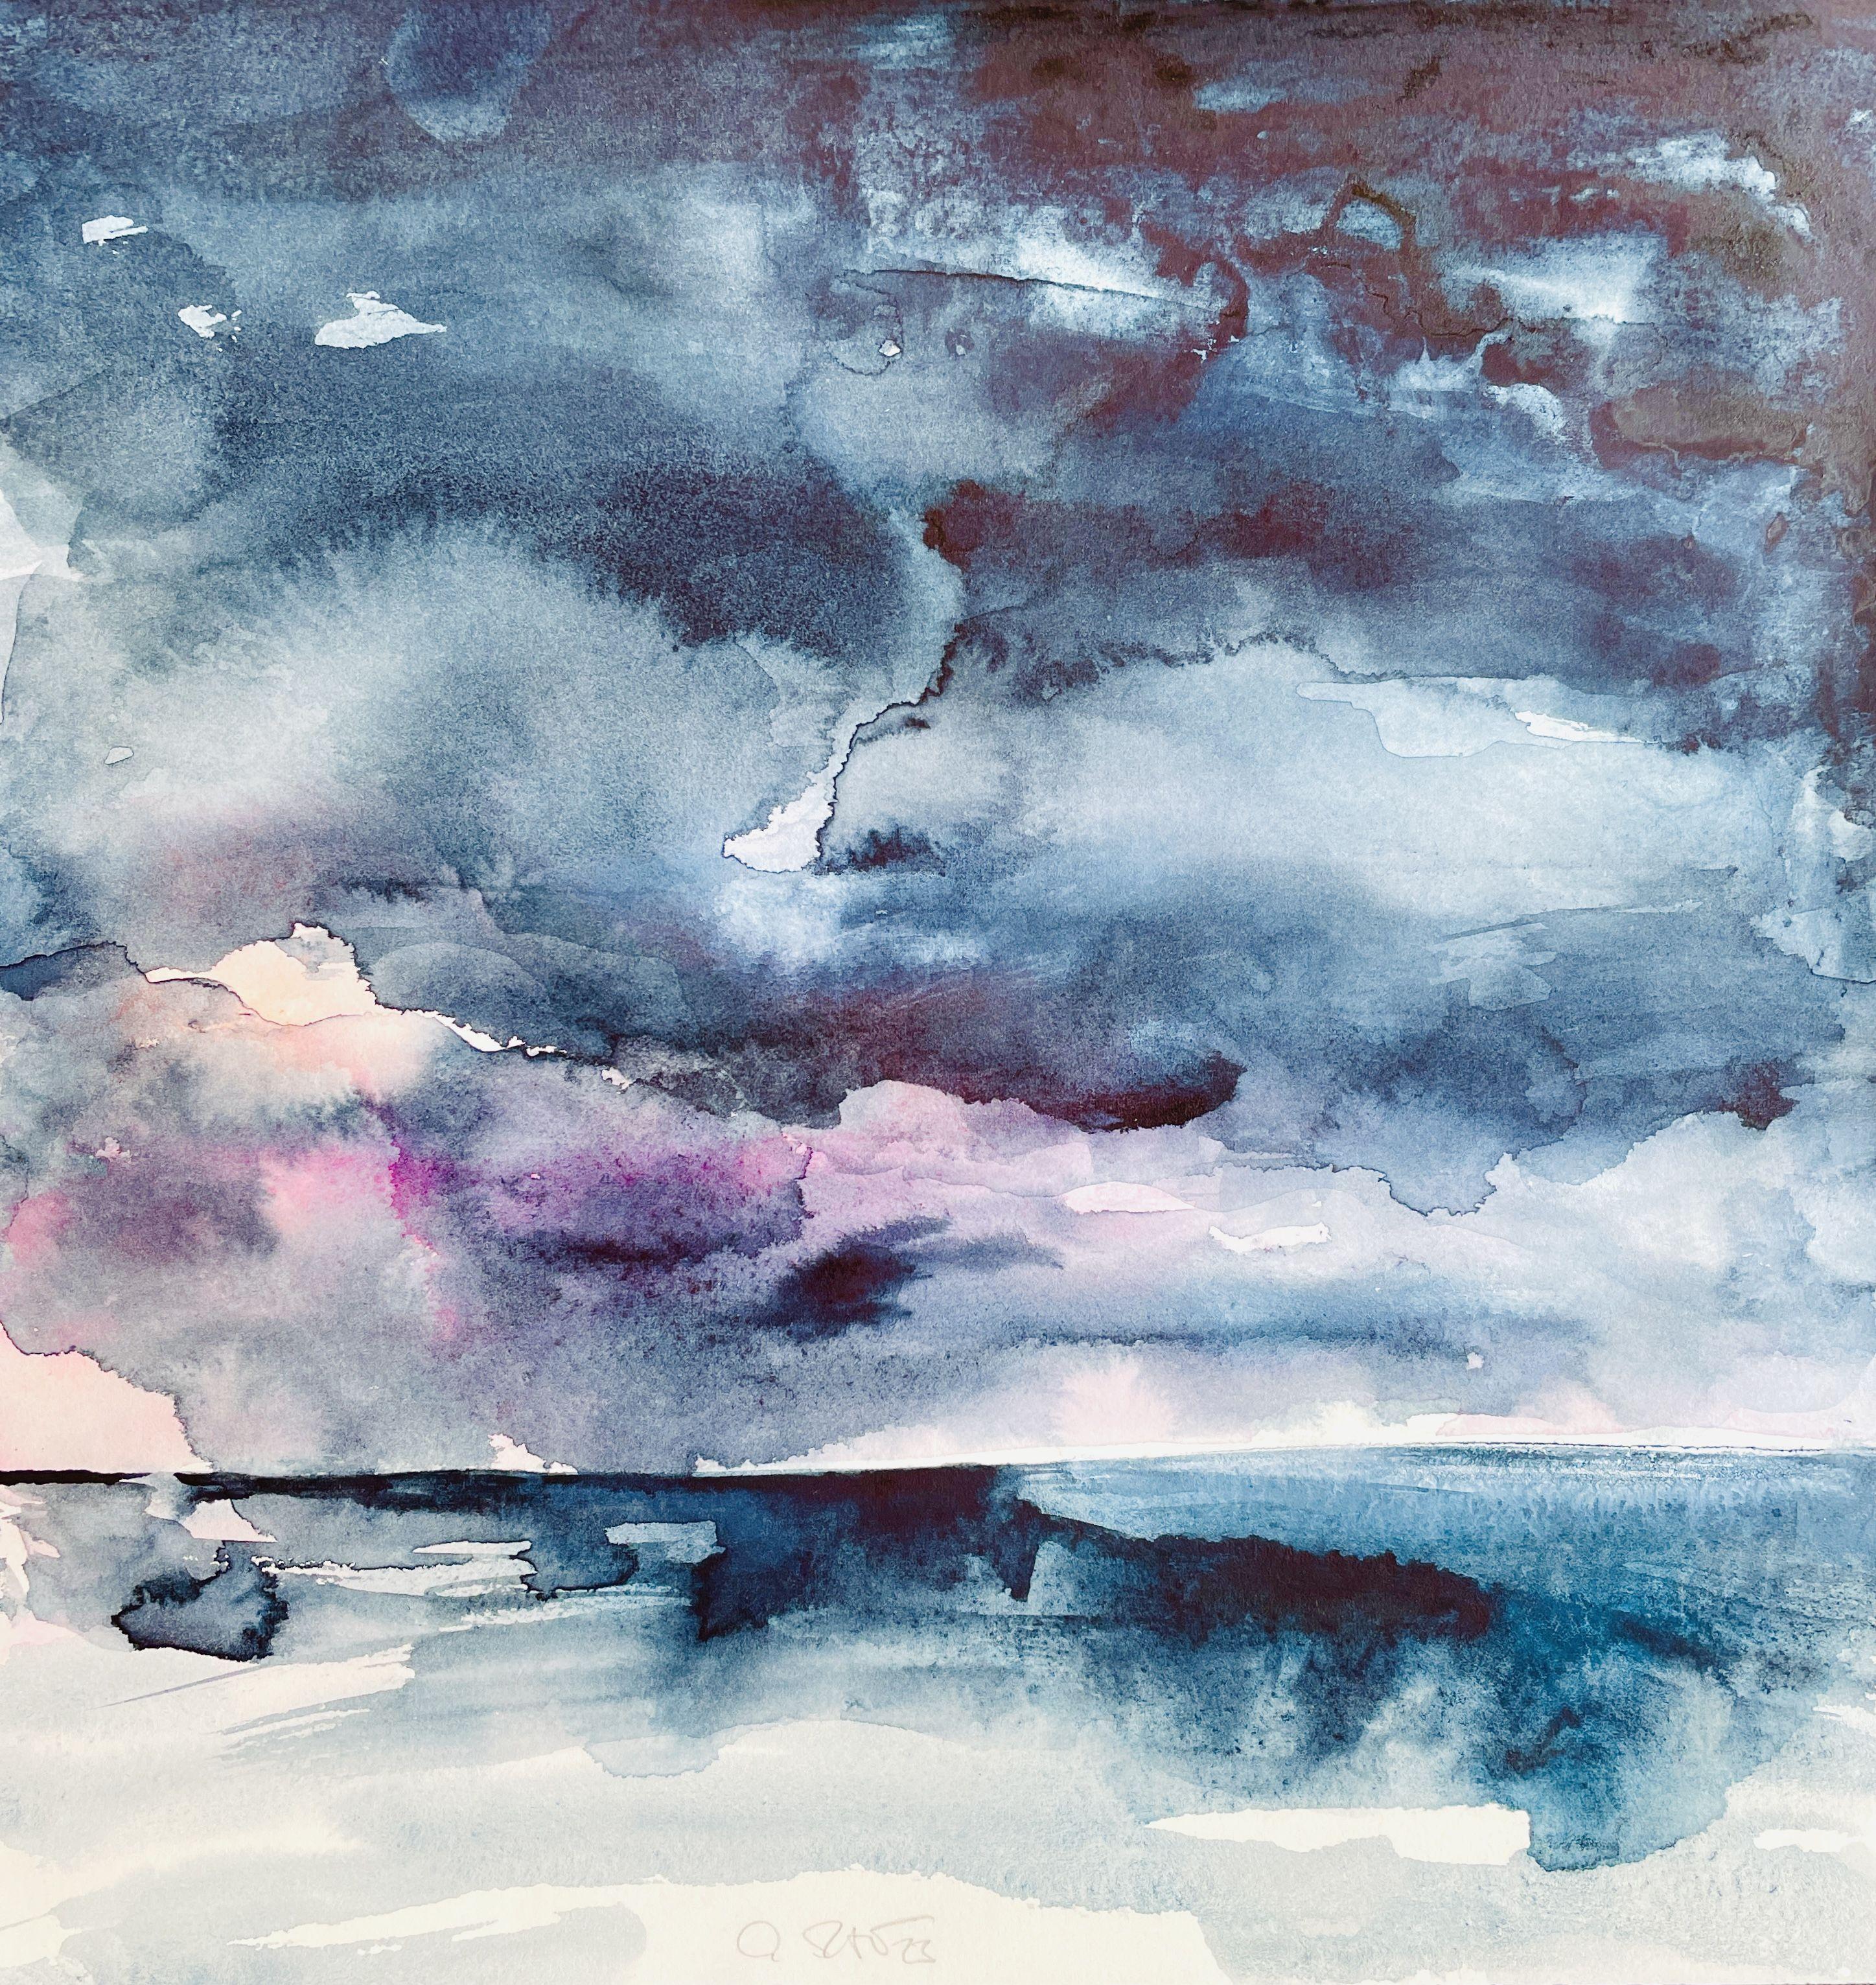 It's All About Clouds, Painting, Watercolor on Paper - Art by Gesa Reuter